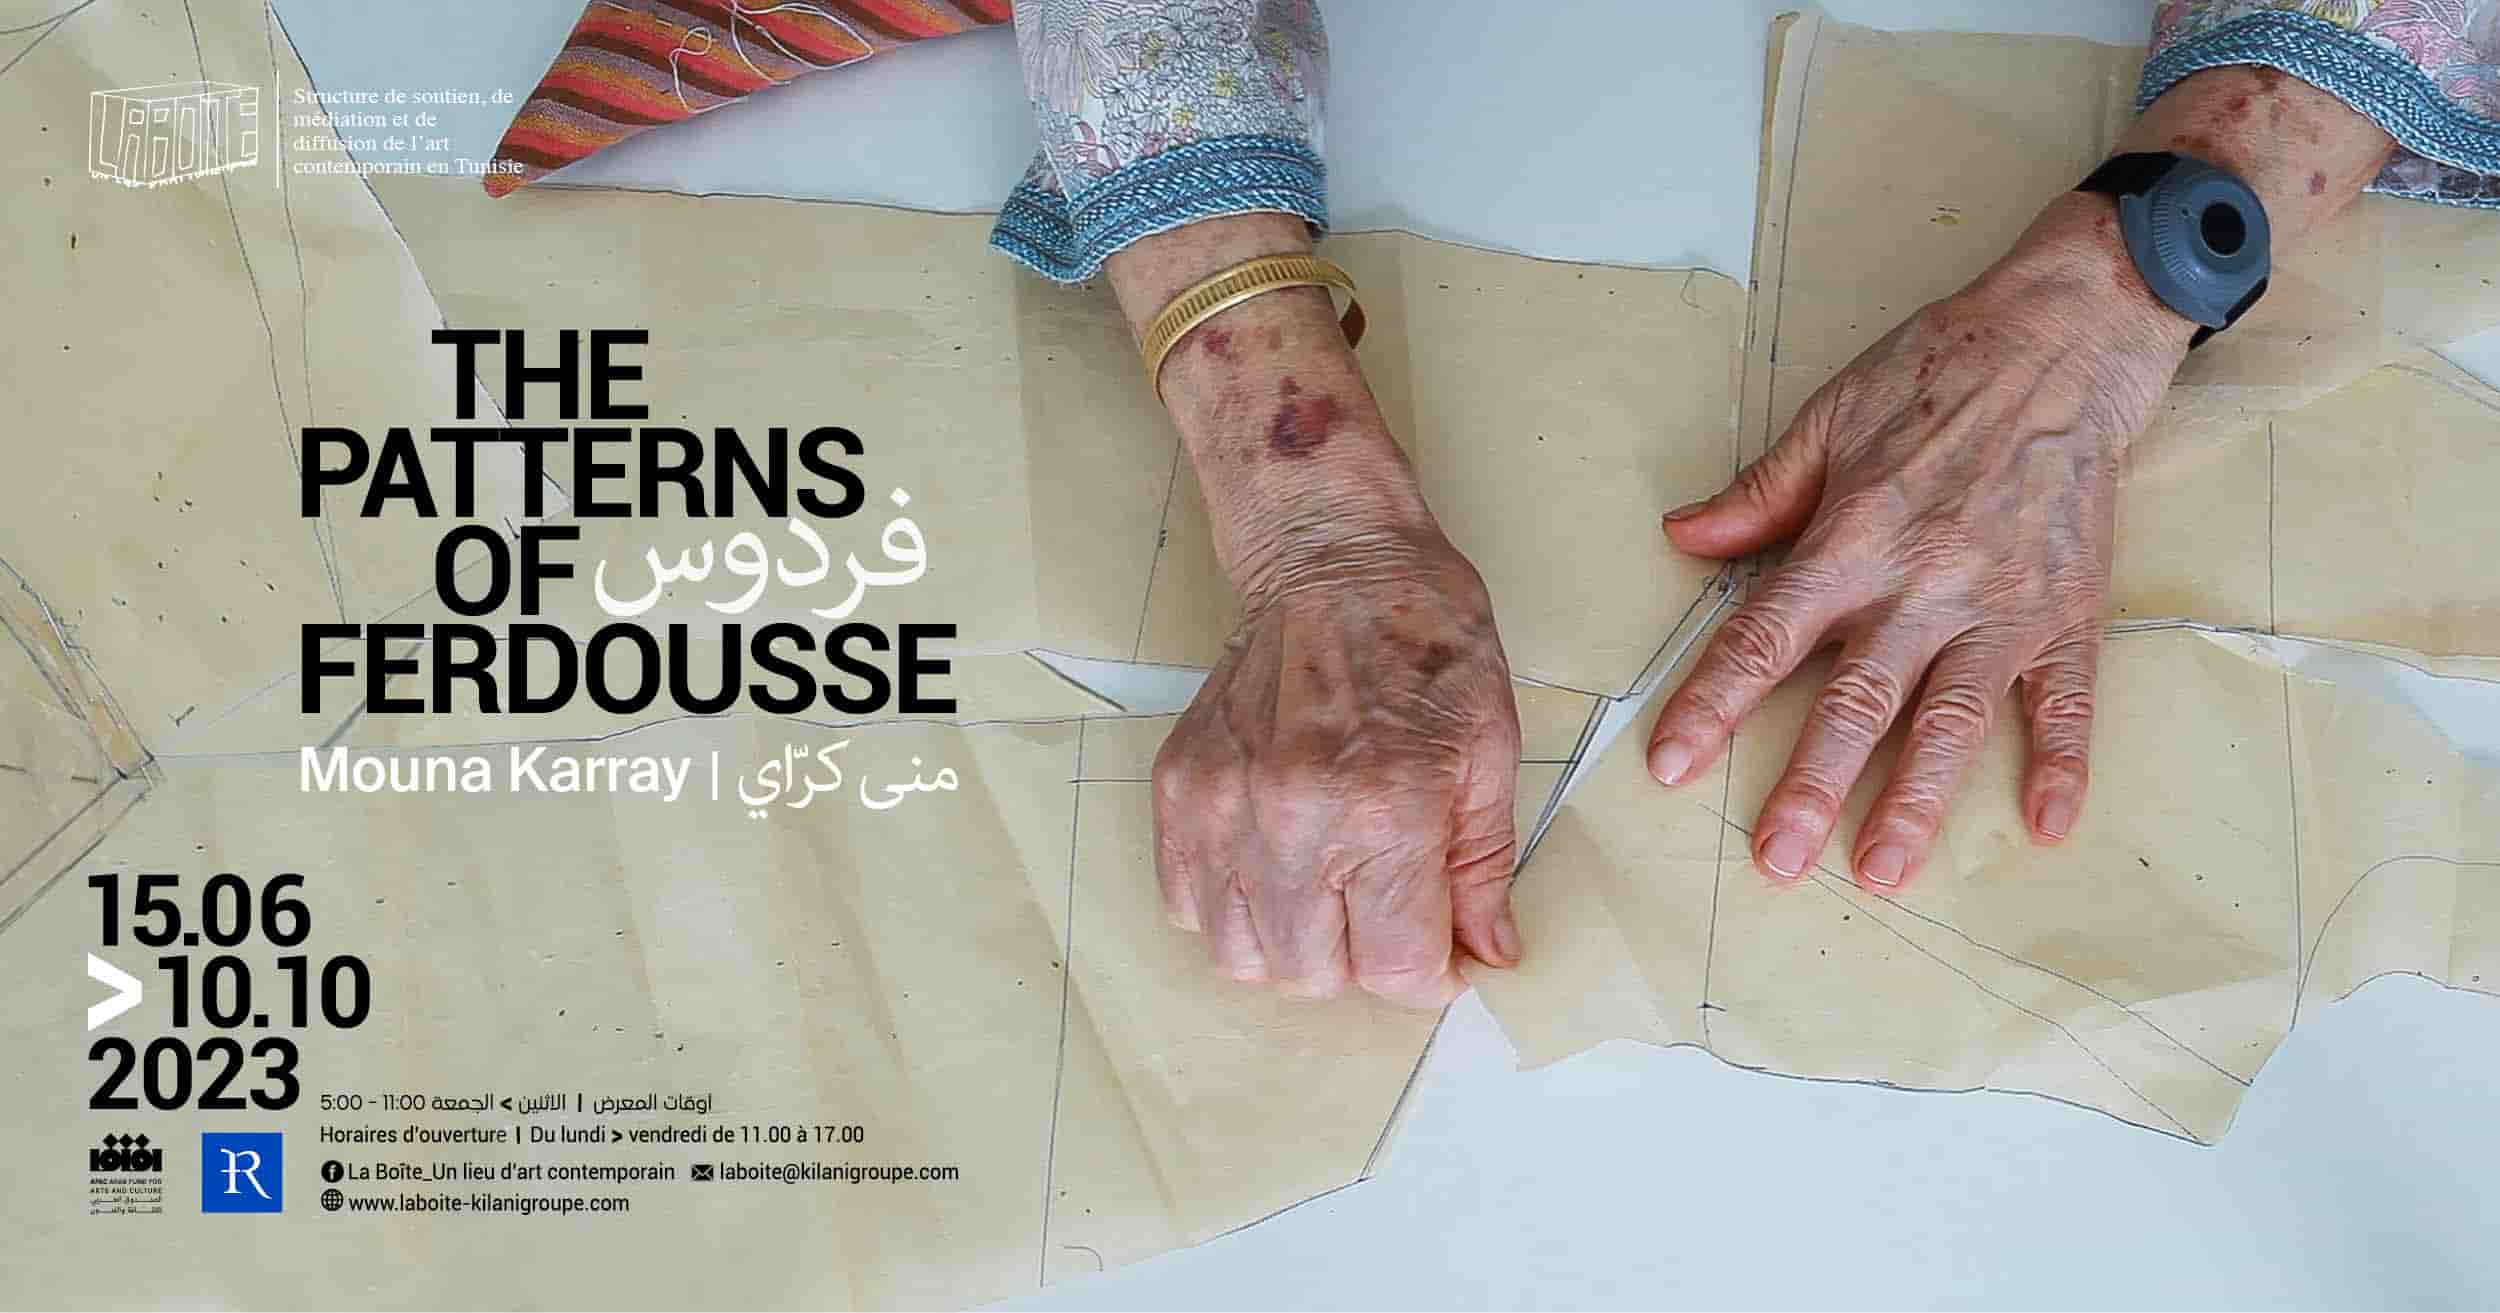 Exhibition "THE PATTERNS OF FERDOUSSE" by Mouna Karray